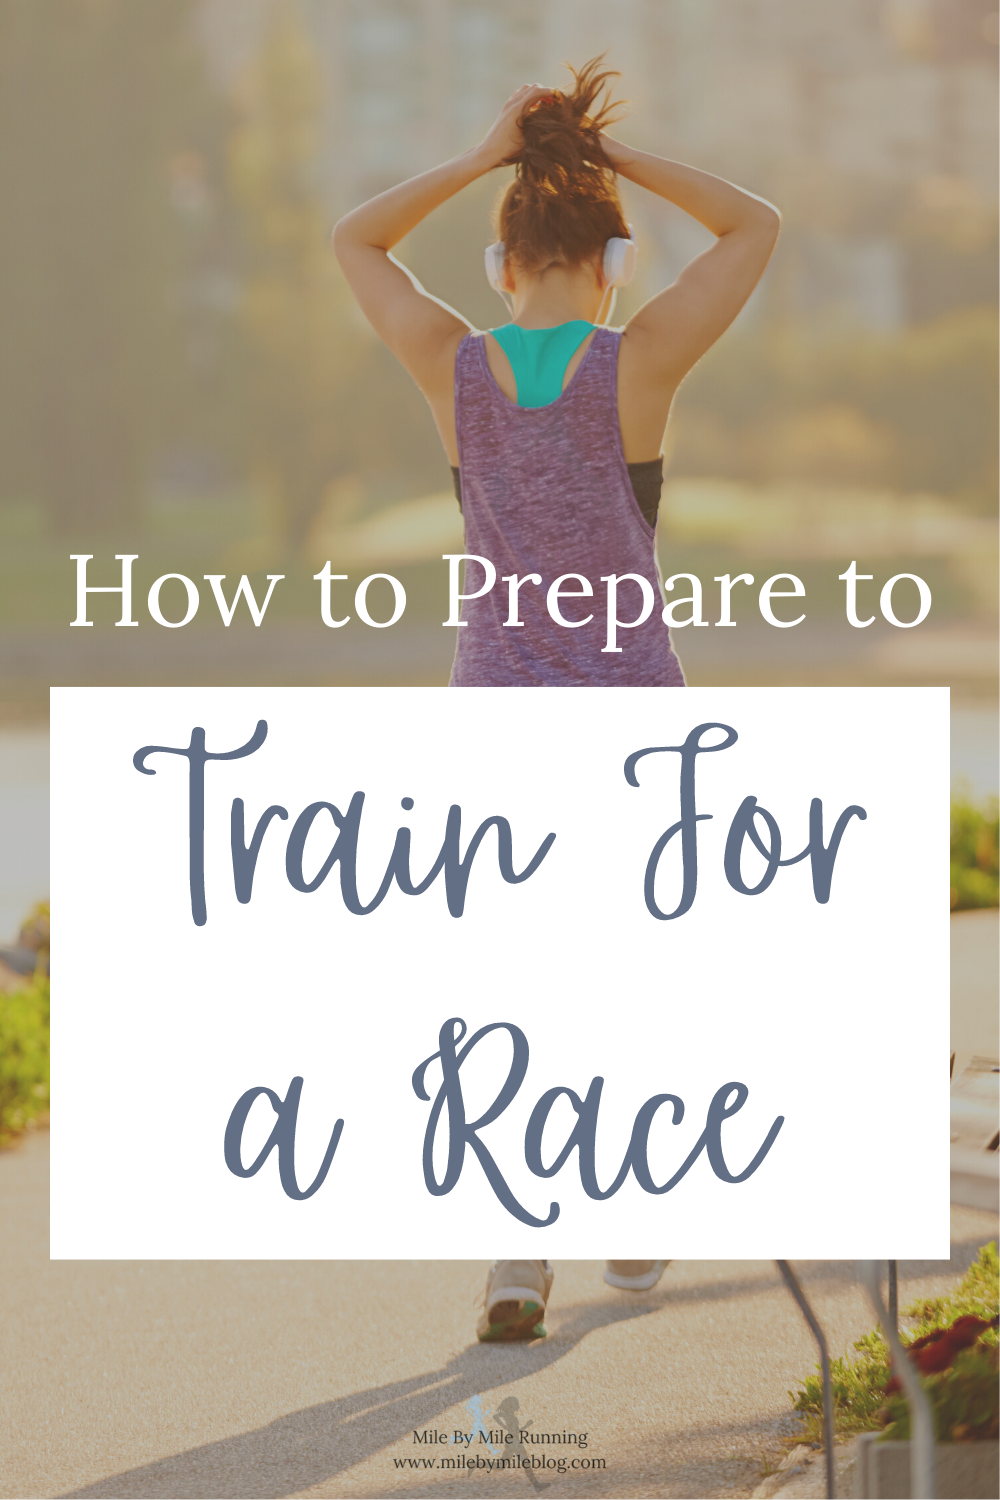 You may already know what you need to do to train for a race, but it’s also important to prepare to train for a race! Make sure you know what you need to do to set yourself up for success in the weeks before your race training begins.